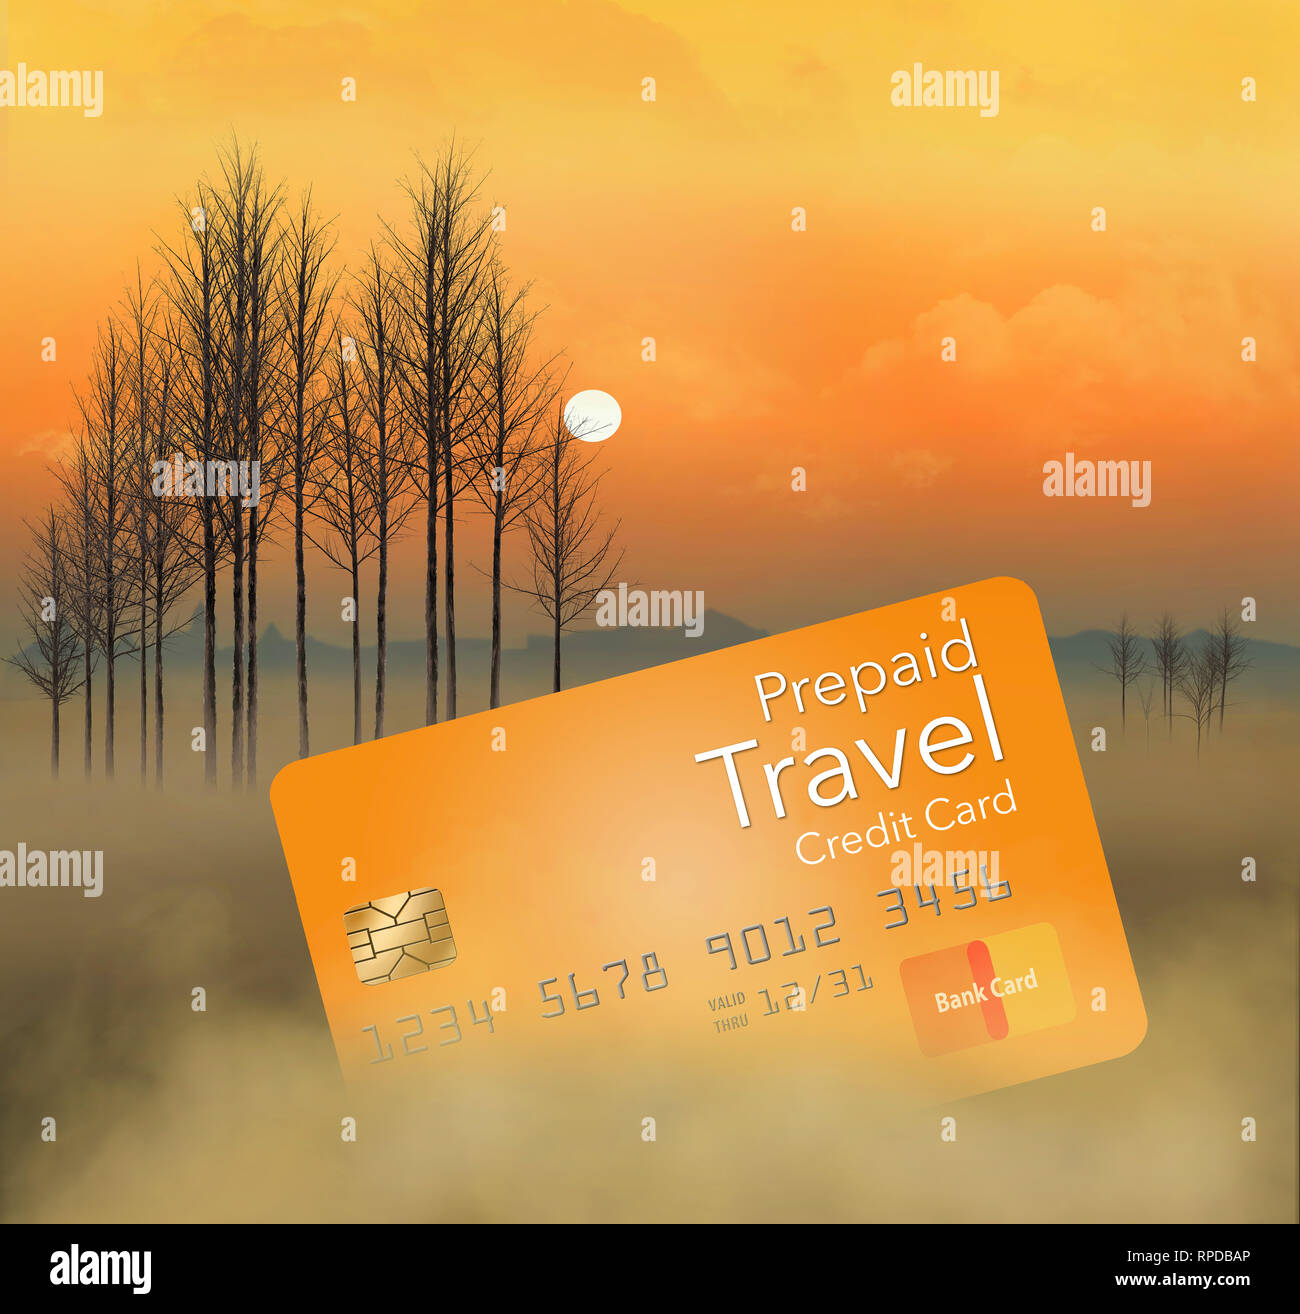 A prepaid travel credit card is seen in a meadow at sunrise with trees, fog, sky and clouds. This is an illustration Stock Photo